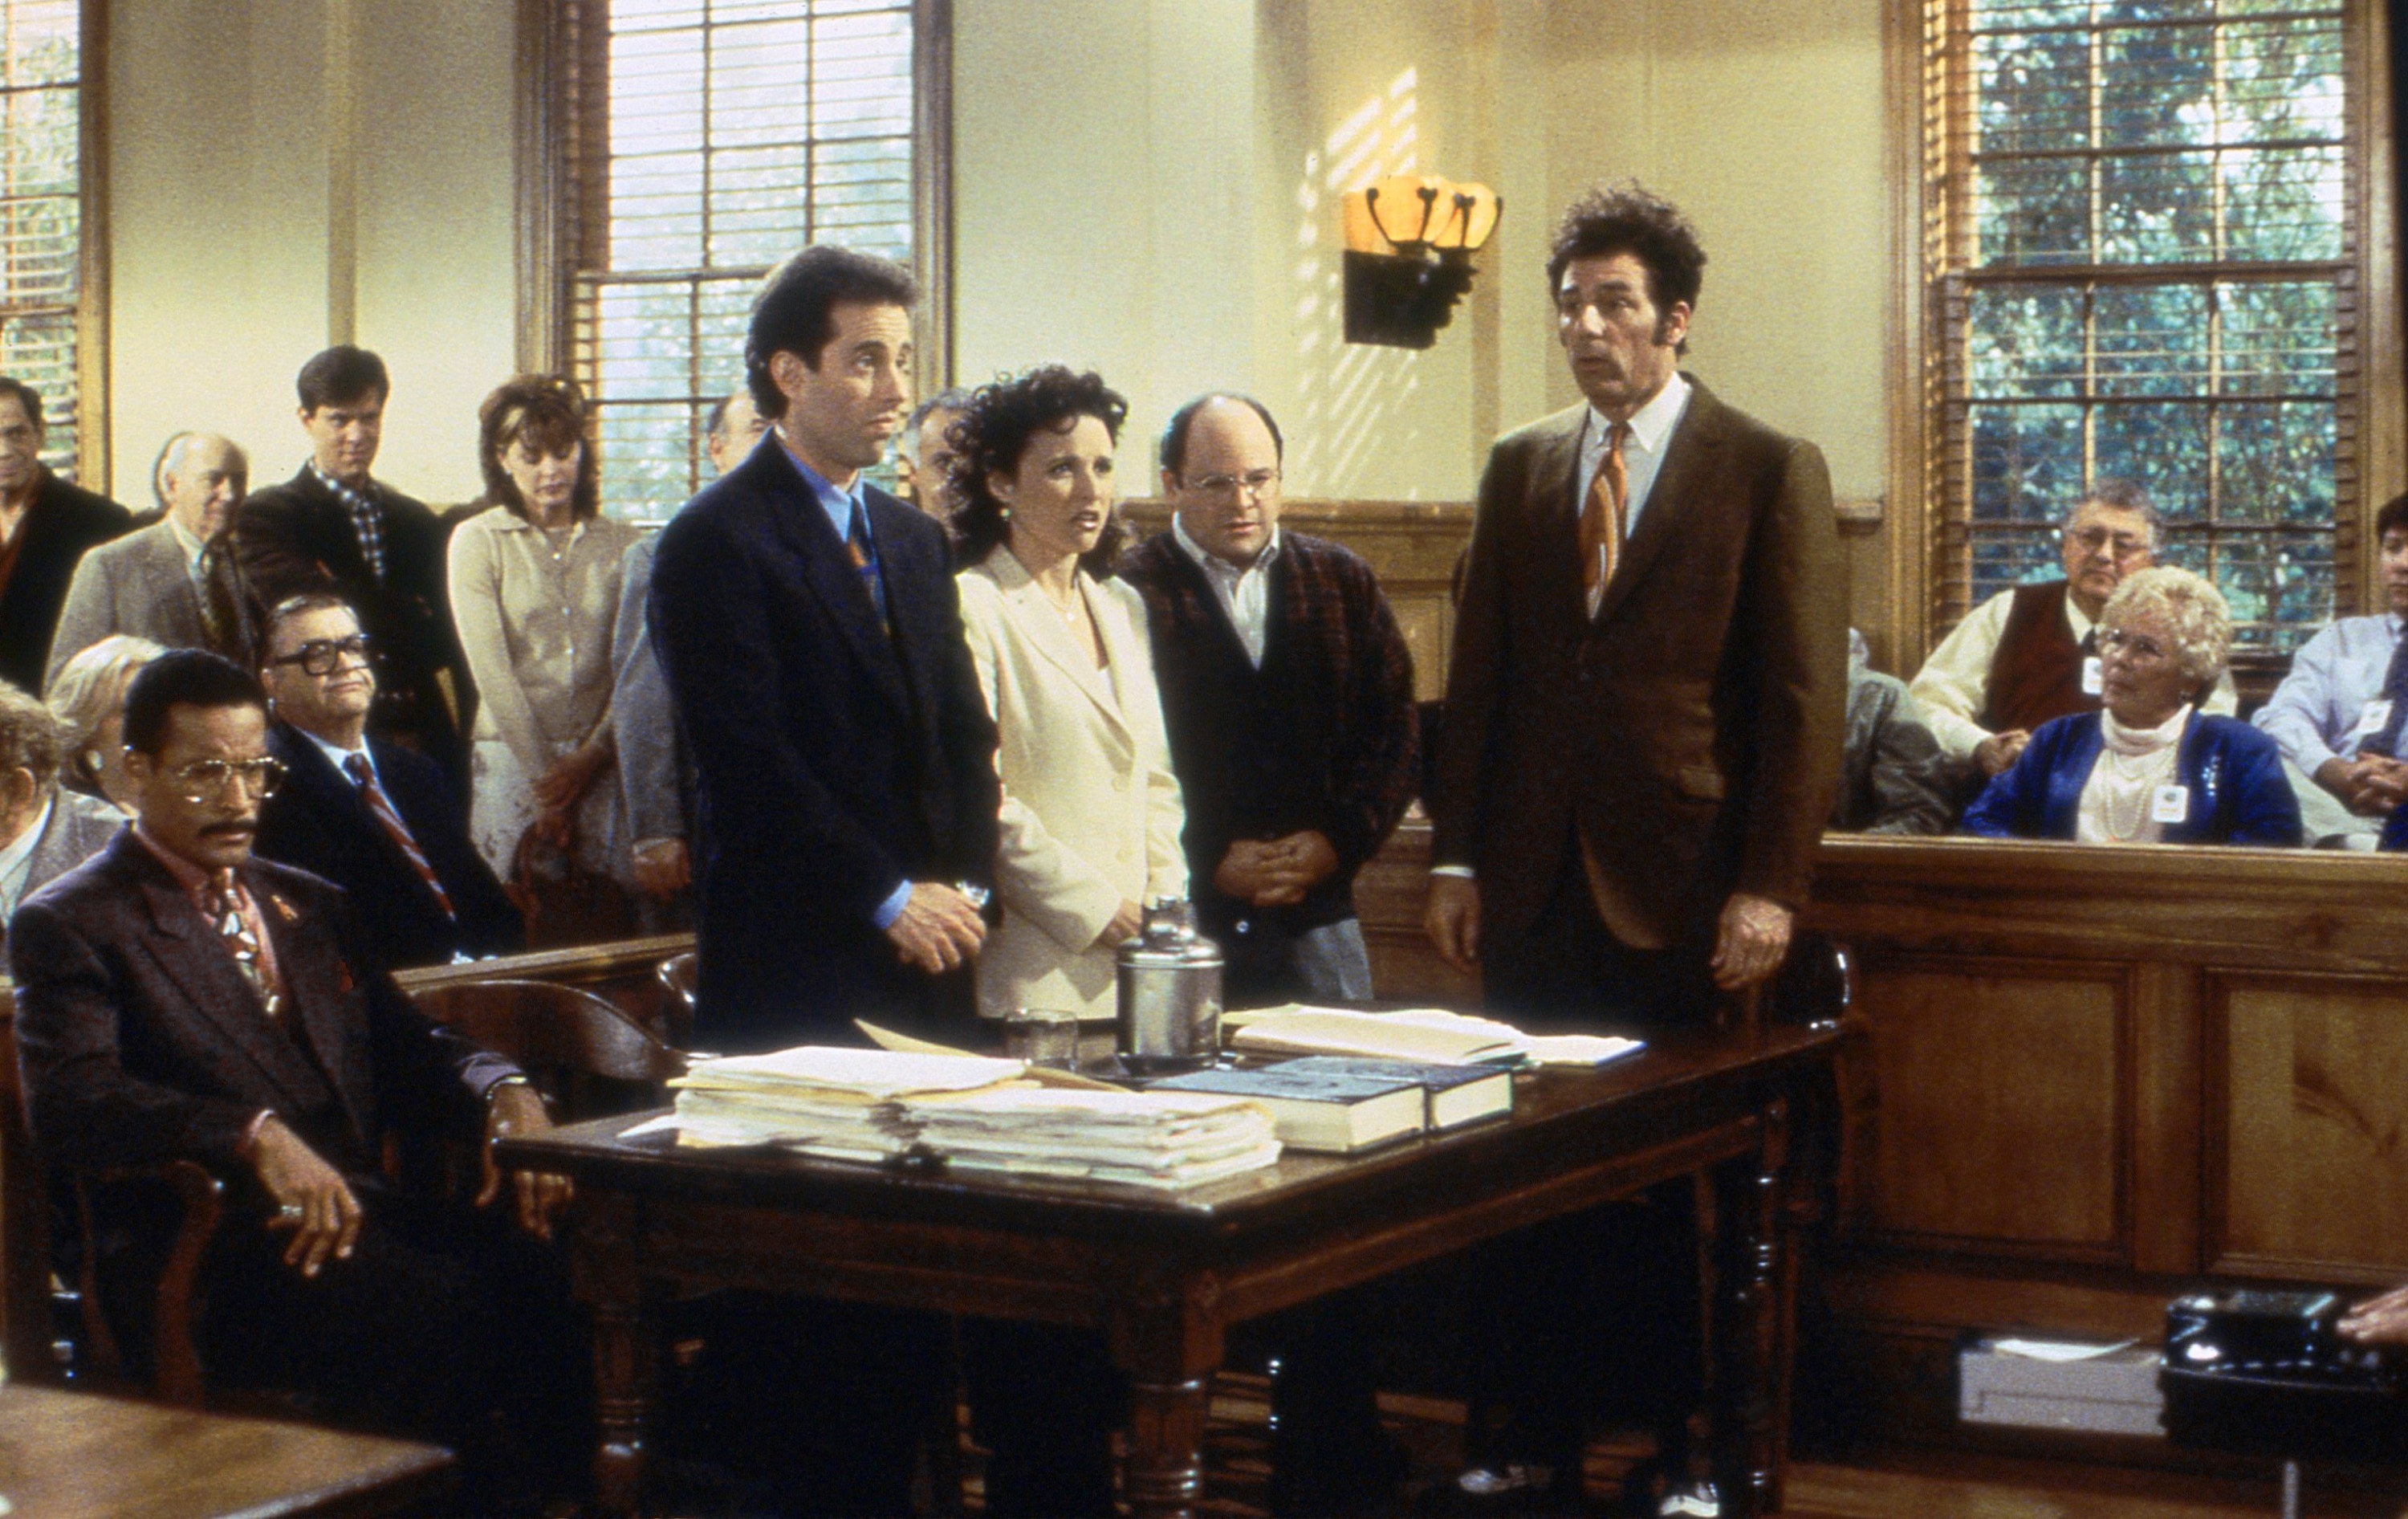 the characters in a court room